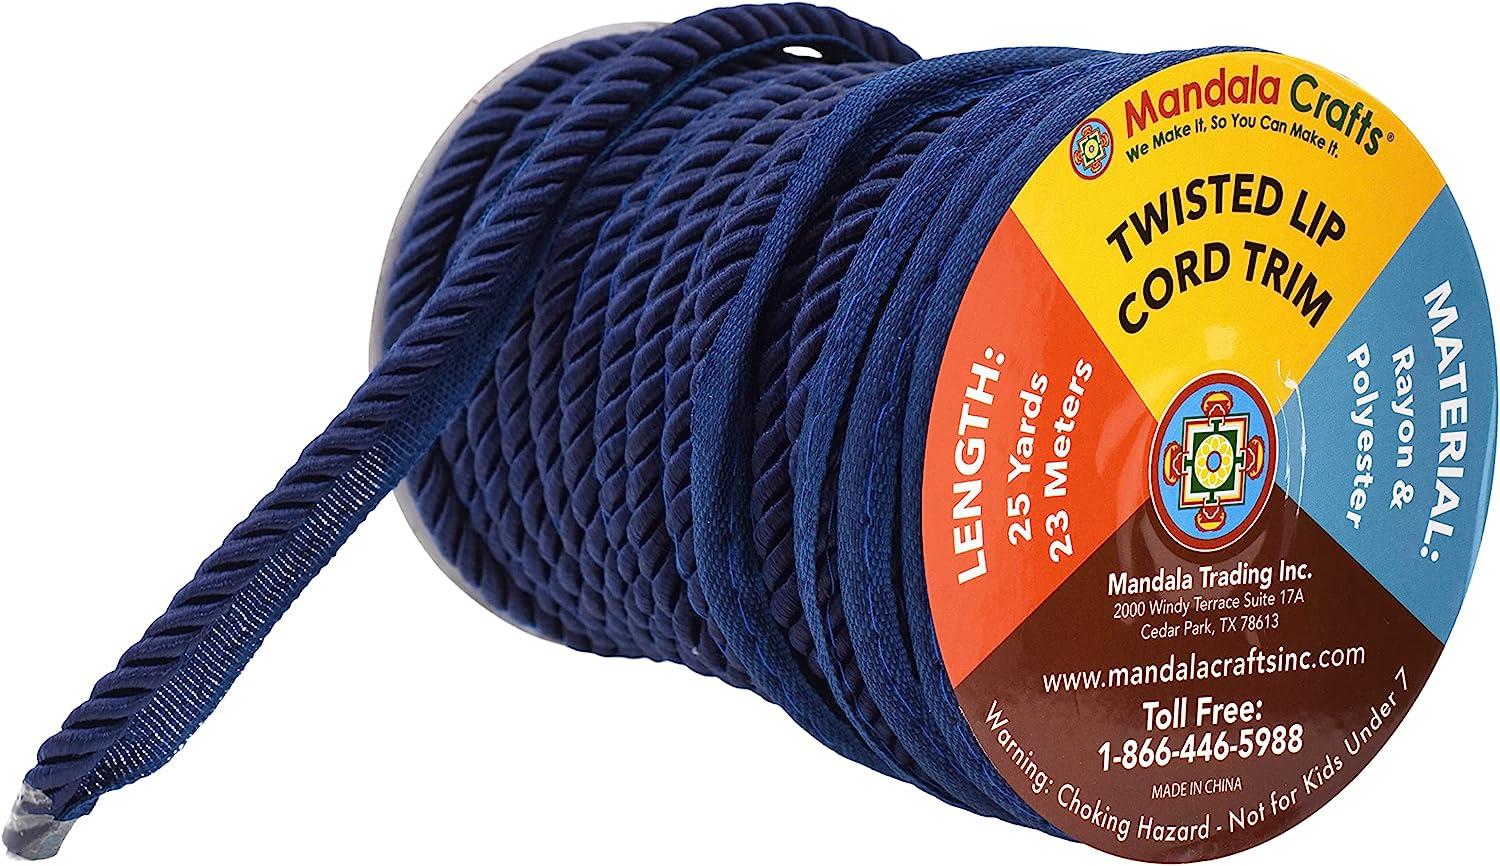 Mandala Crafts Twisted Lip Cord Trim by The Yard - Navy Blue Lip Cording  for Sewing Pillows Upholstery Trim Edge Sewing Piping Cord